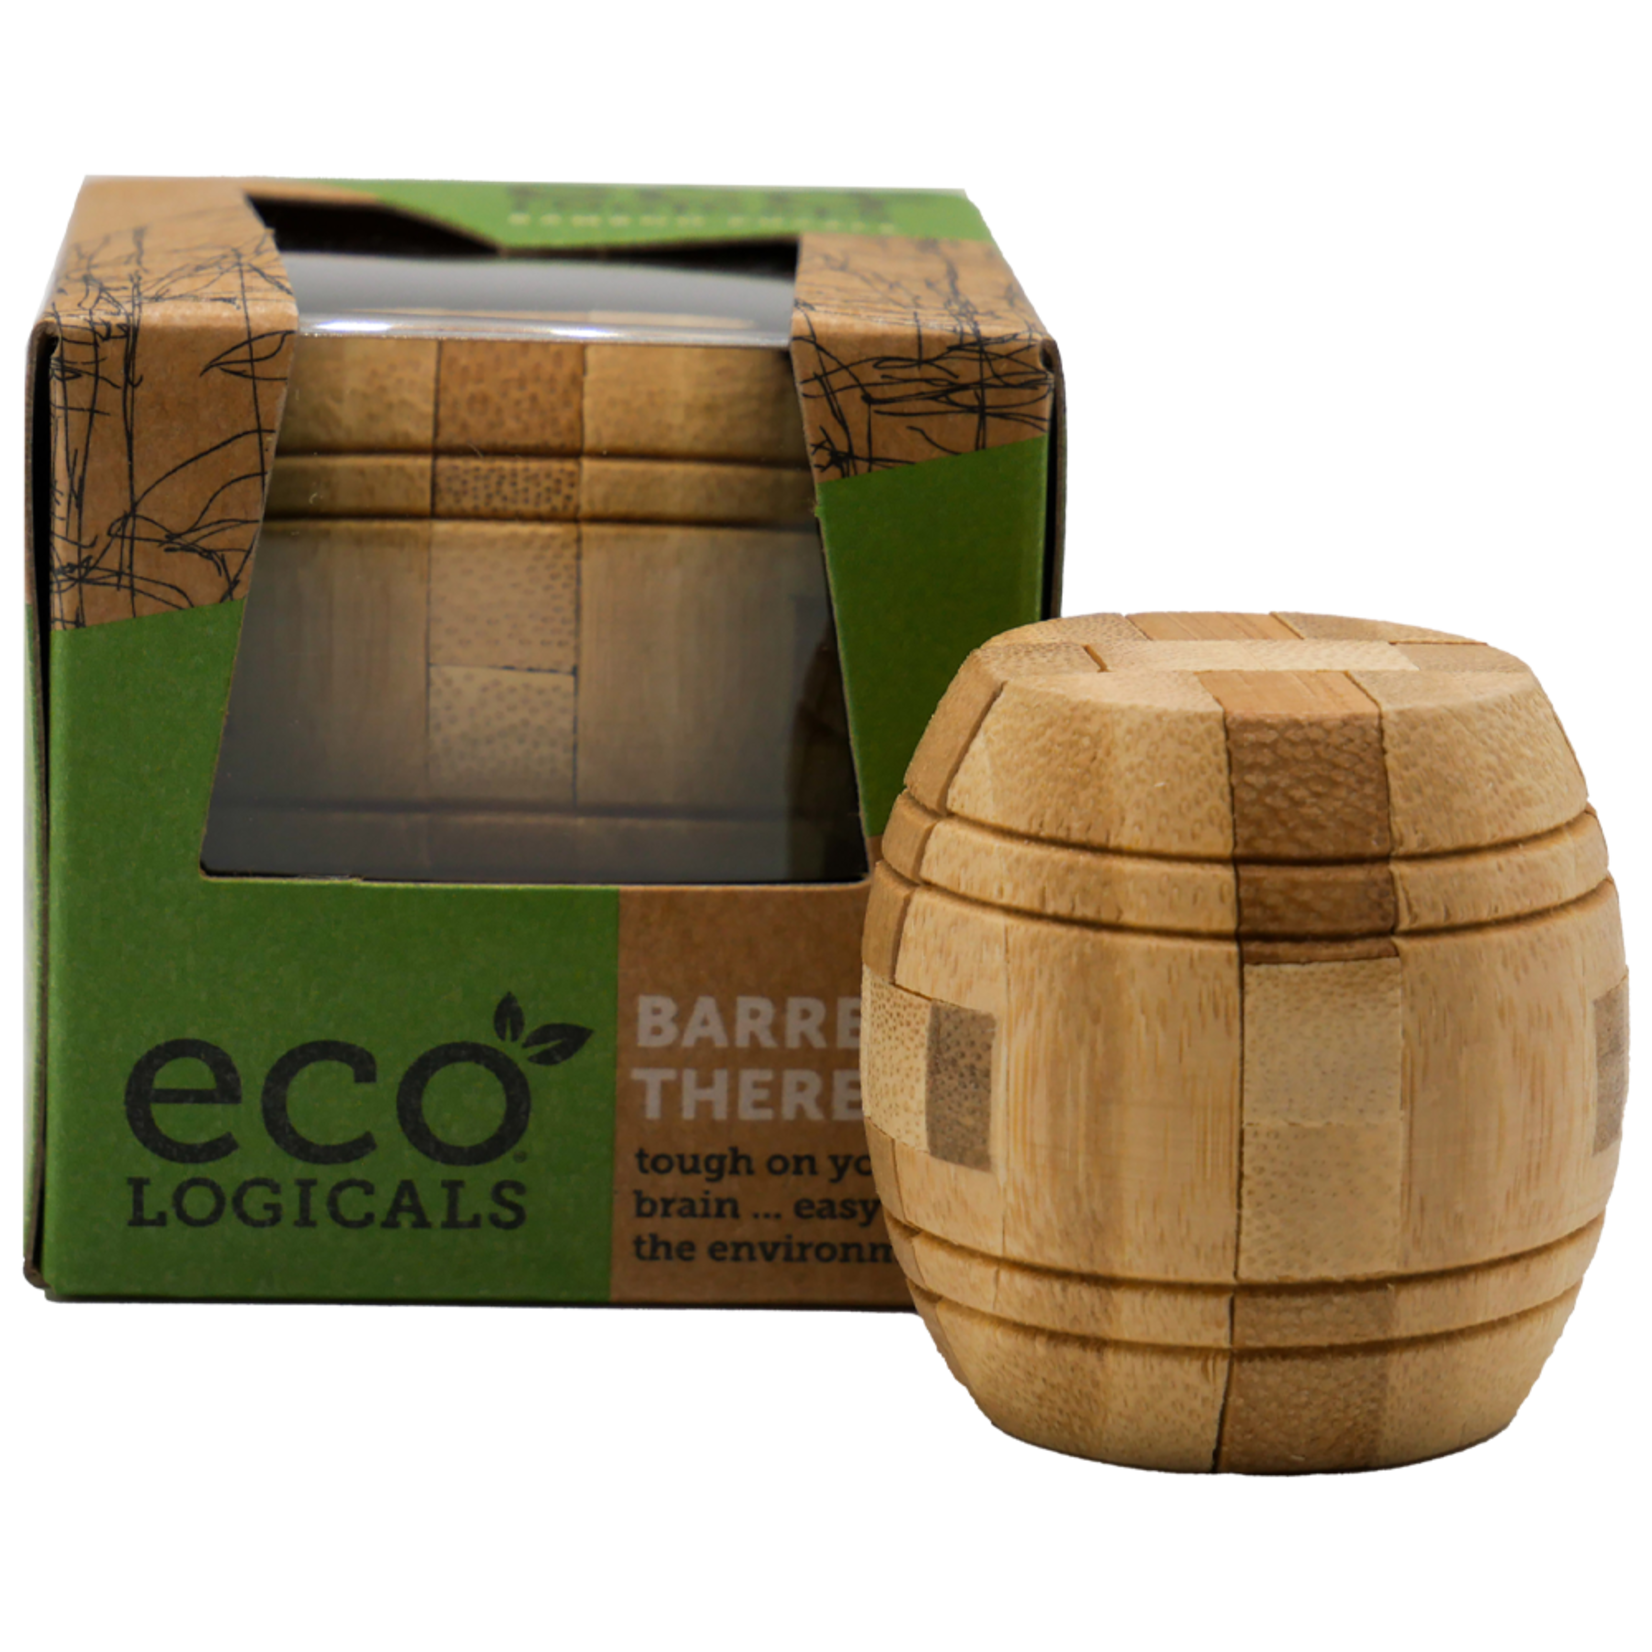 Project Genius Eco Logicals Bamboo: Barrely There